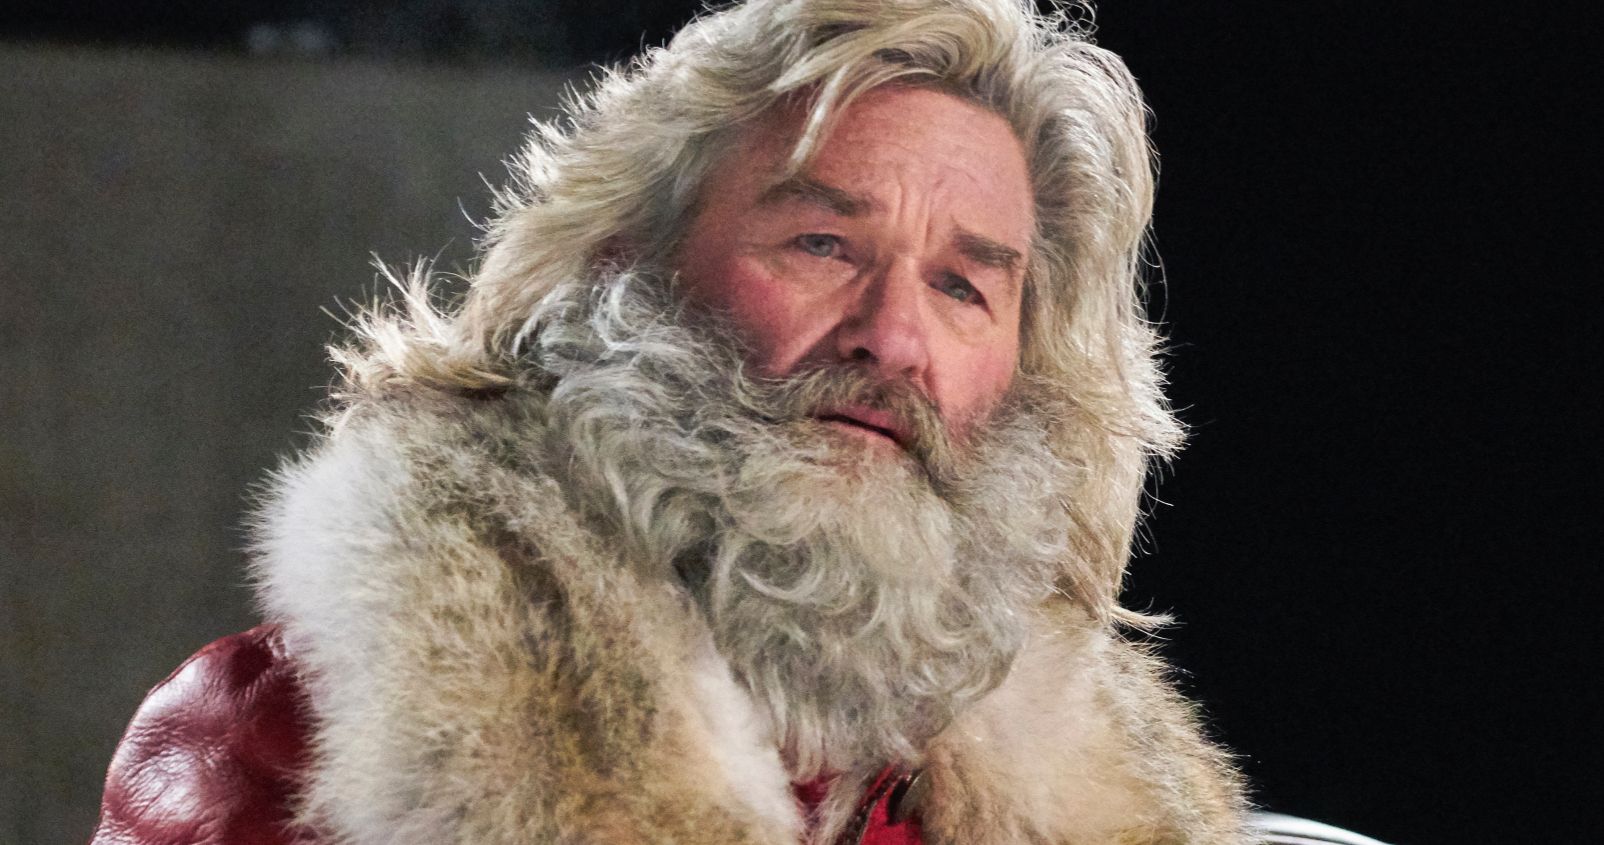 The Christmas Chronicles 2 Had Kurt Russell Writing a 200-Page Backstory for Santa